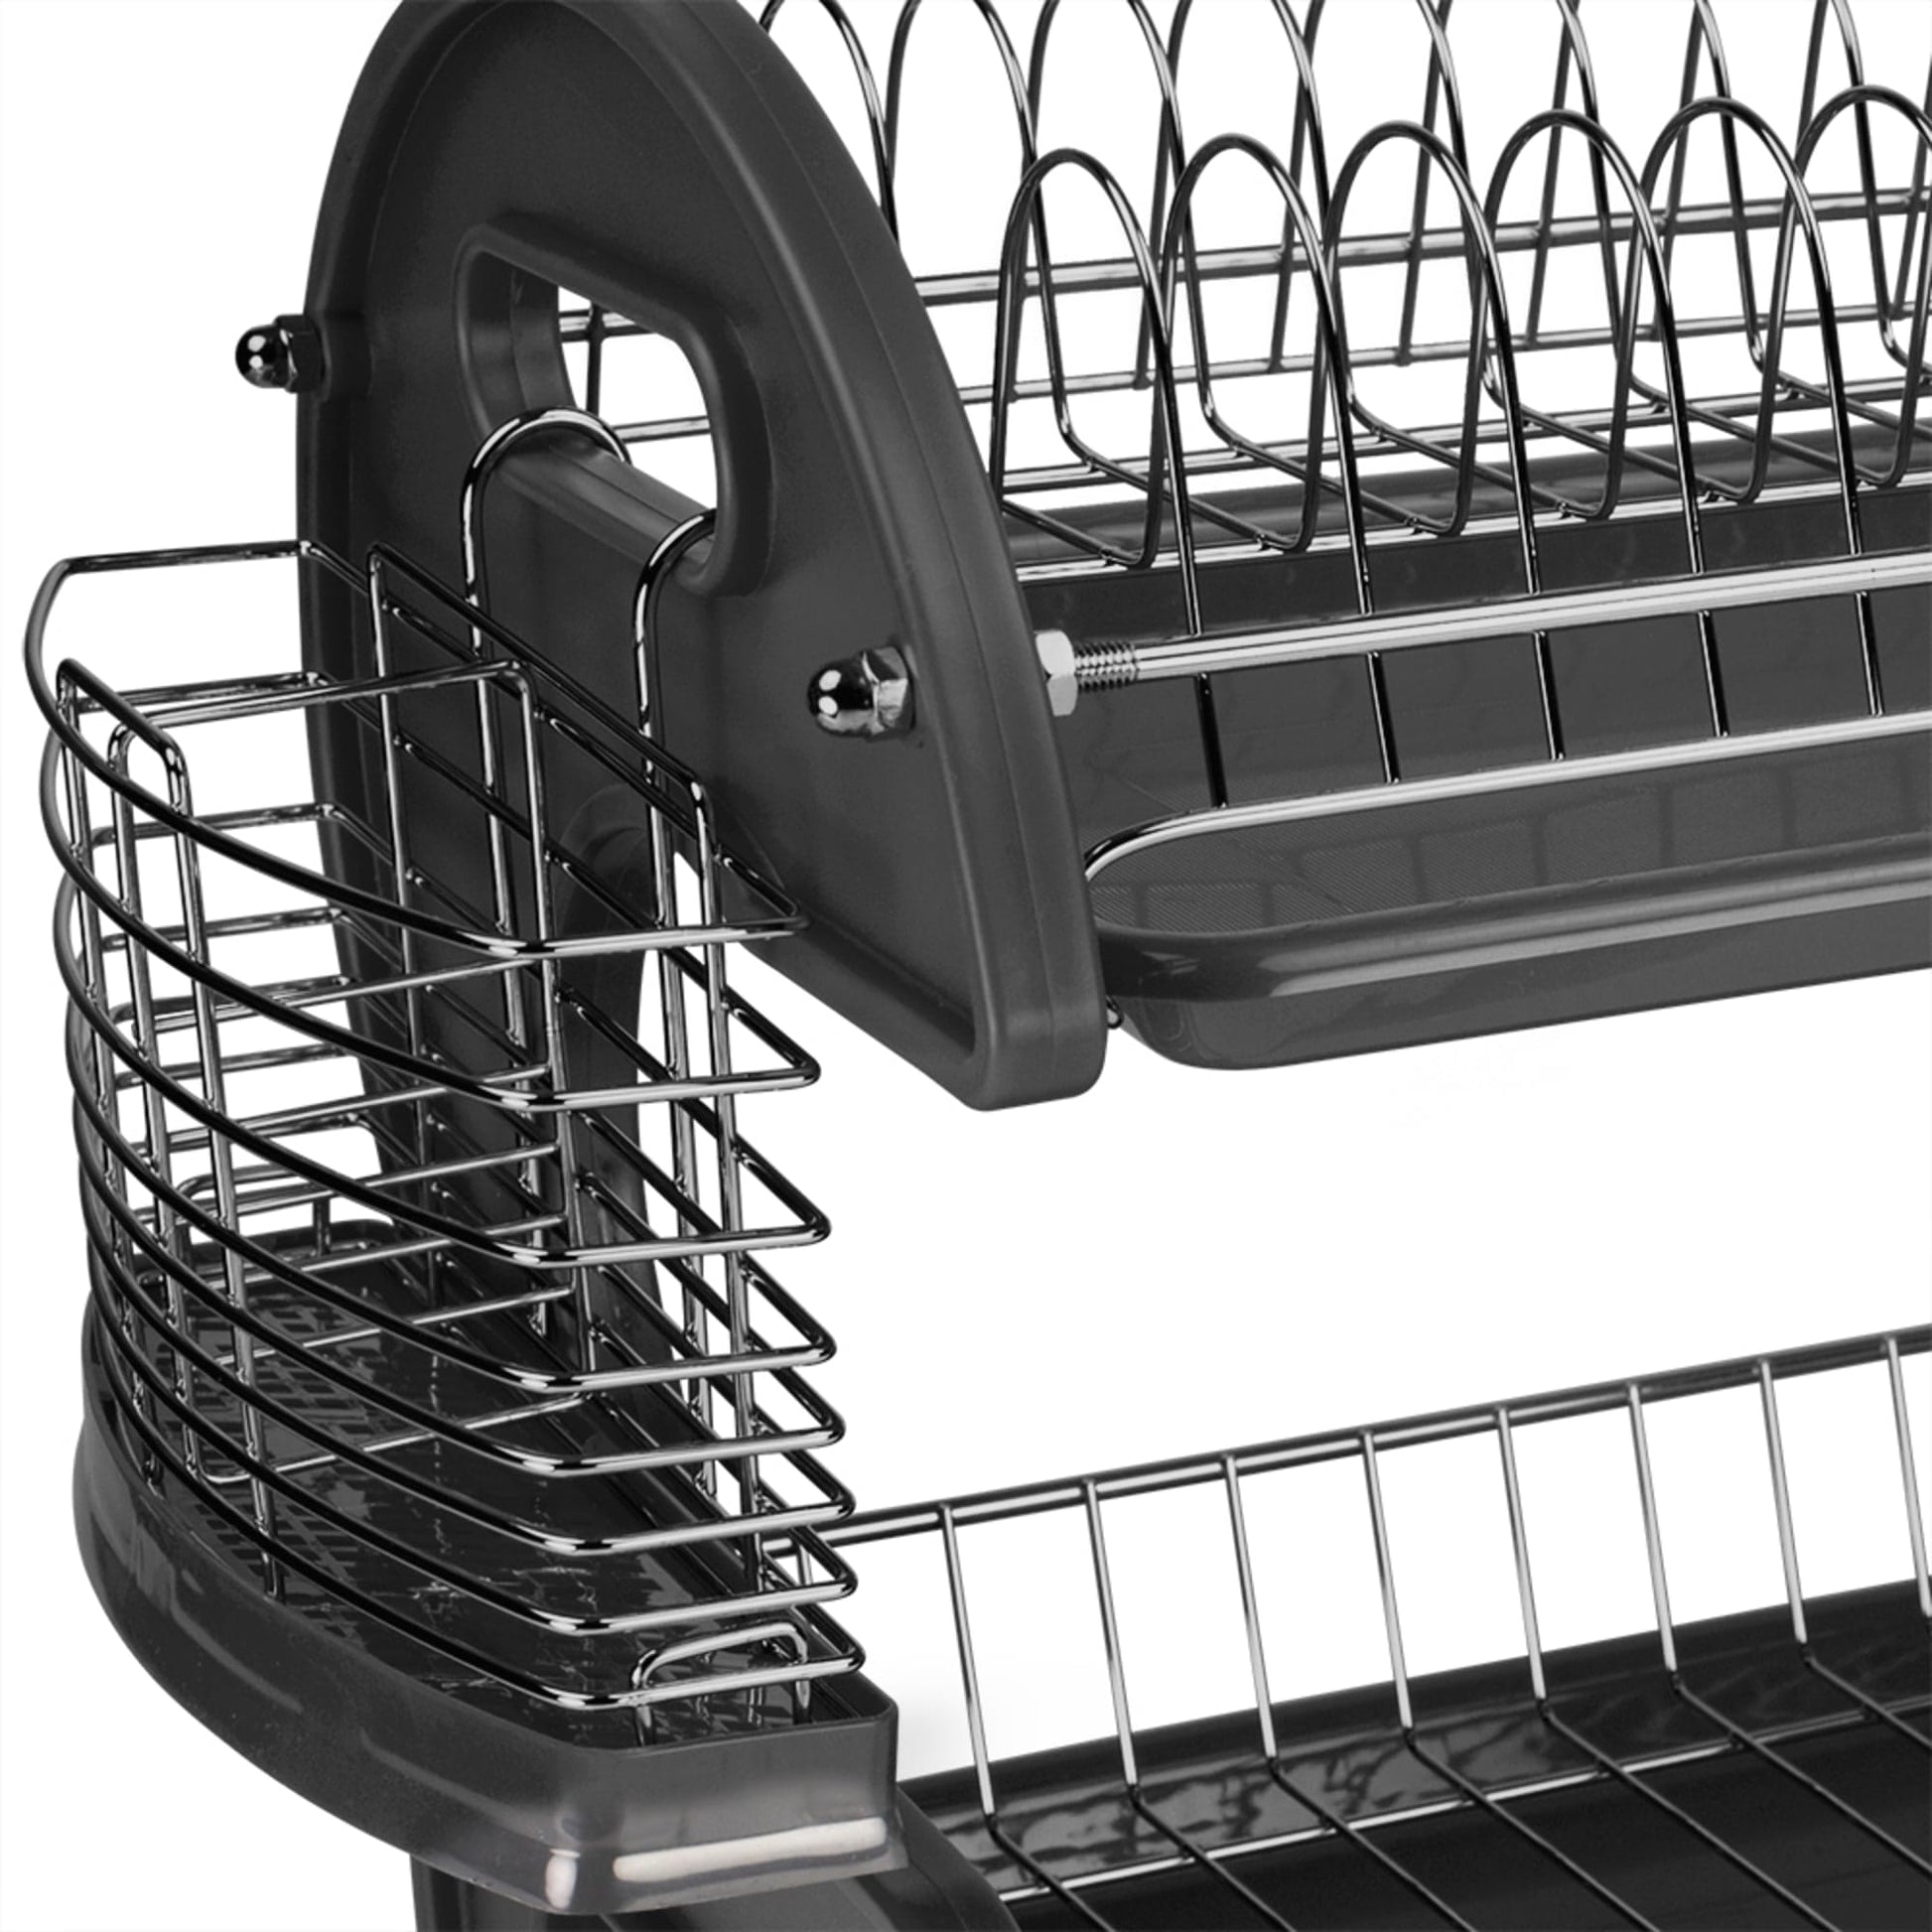 Home Basics 2-tier Plastic Dish Drainer, Red : Target